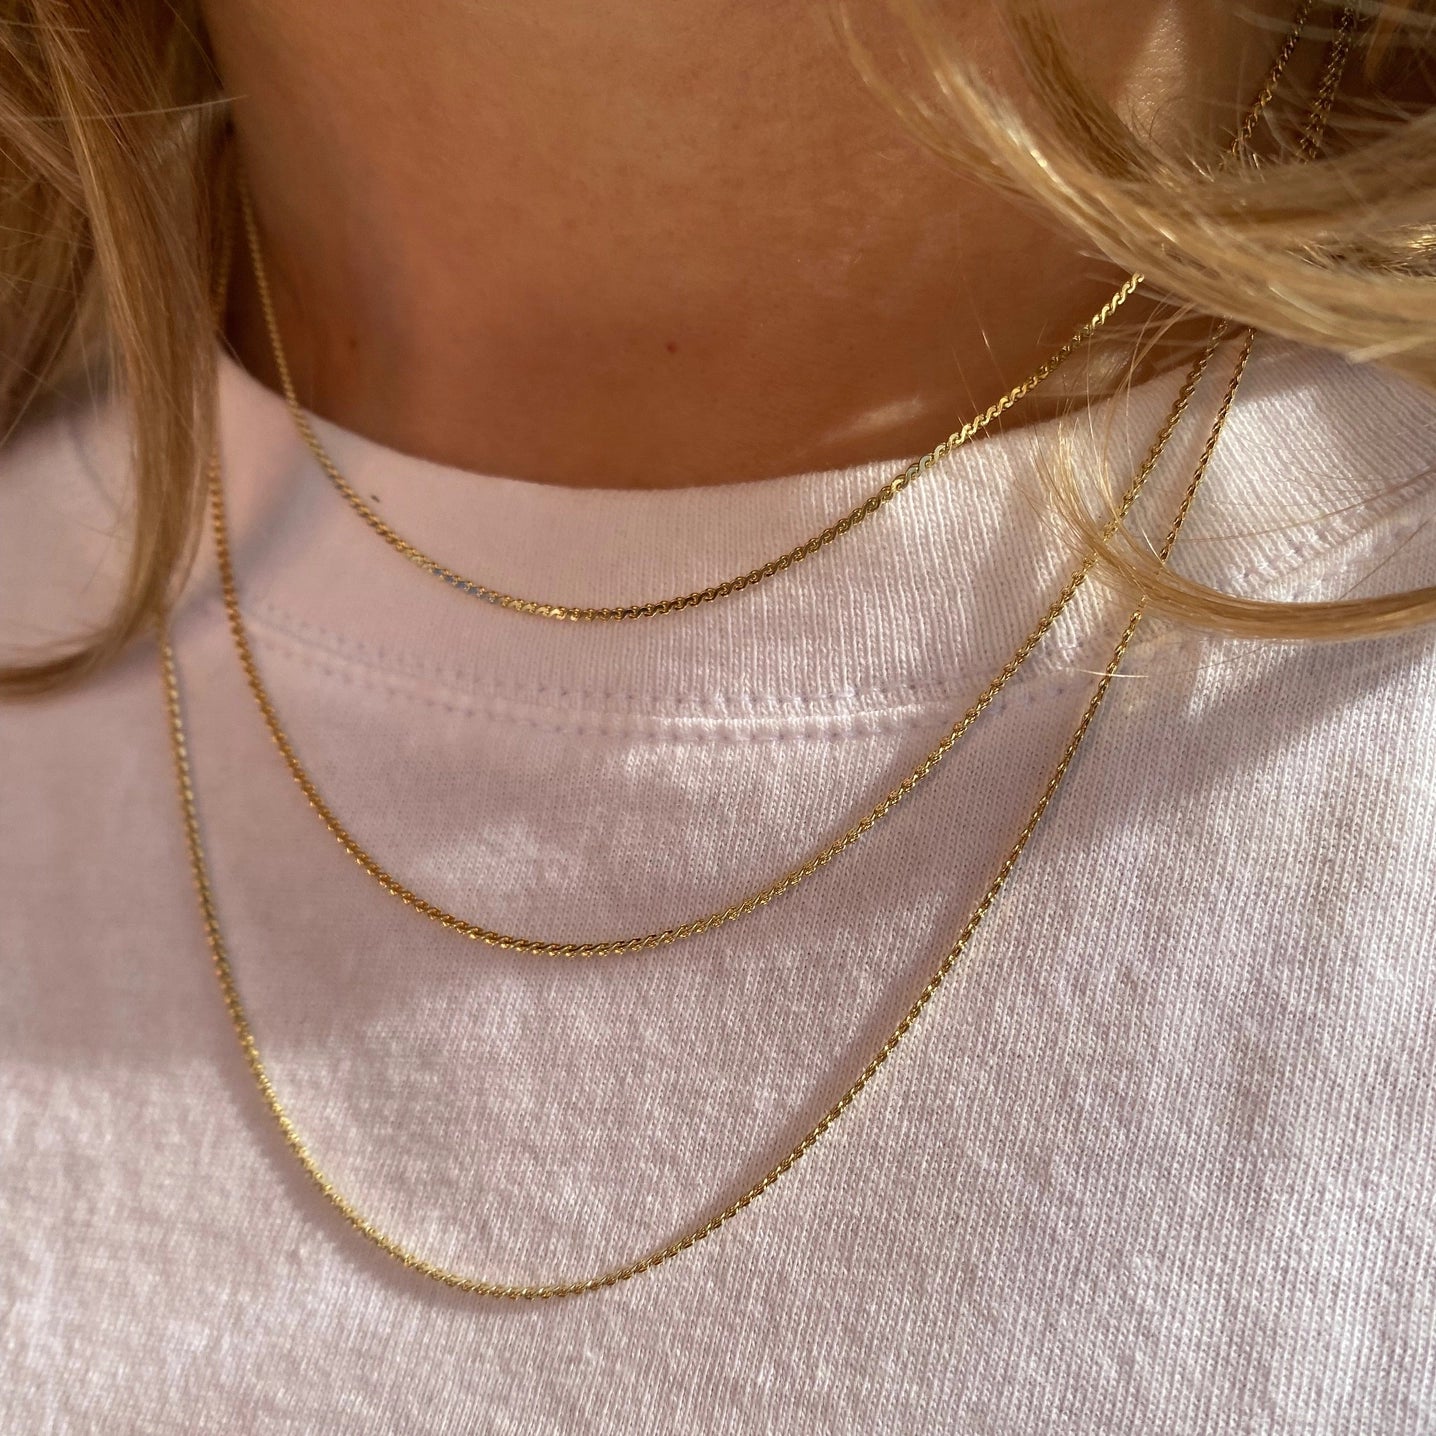 18k Gold Filled Dainty Chain Necklace Apex Ethical Boutique